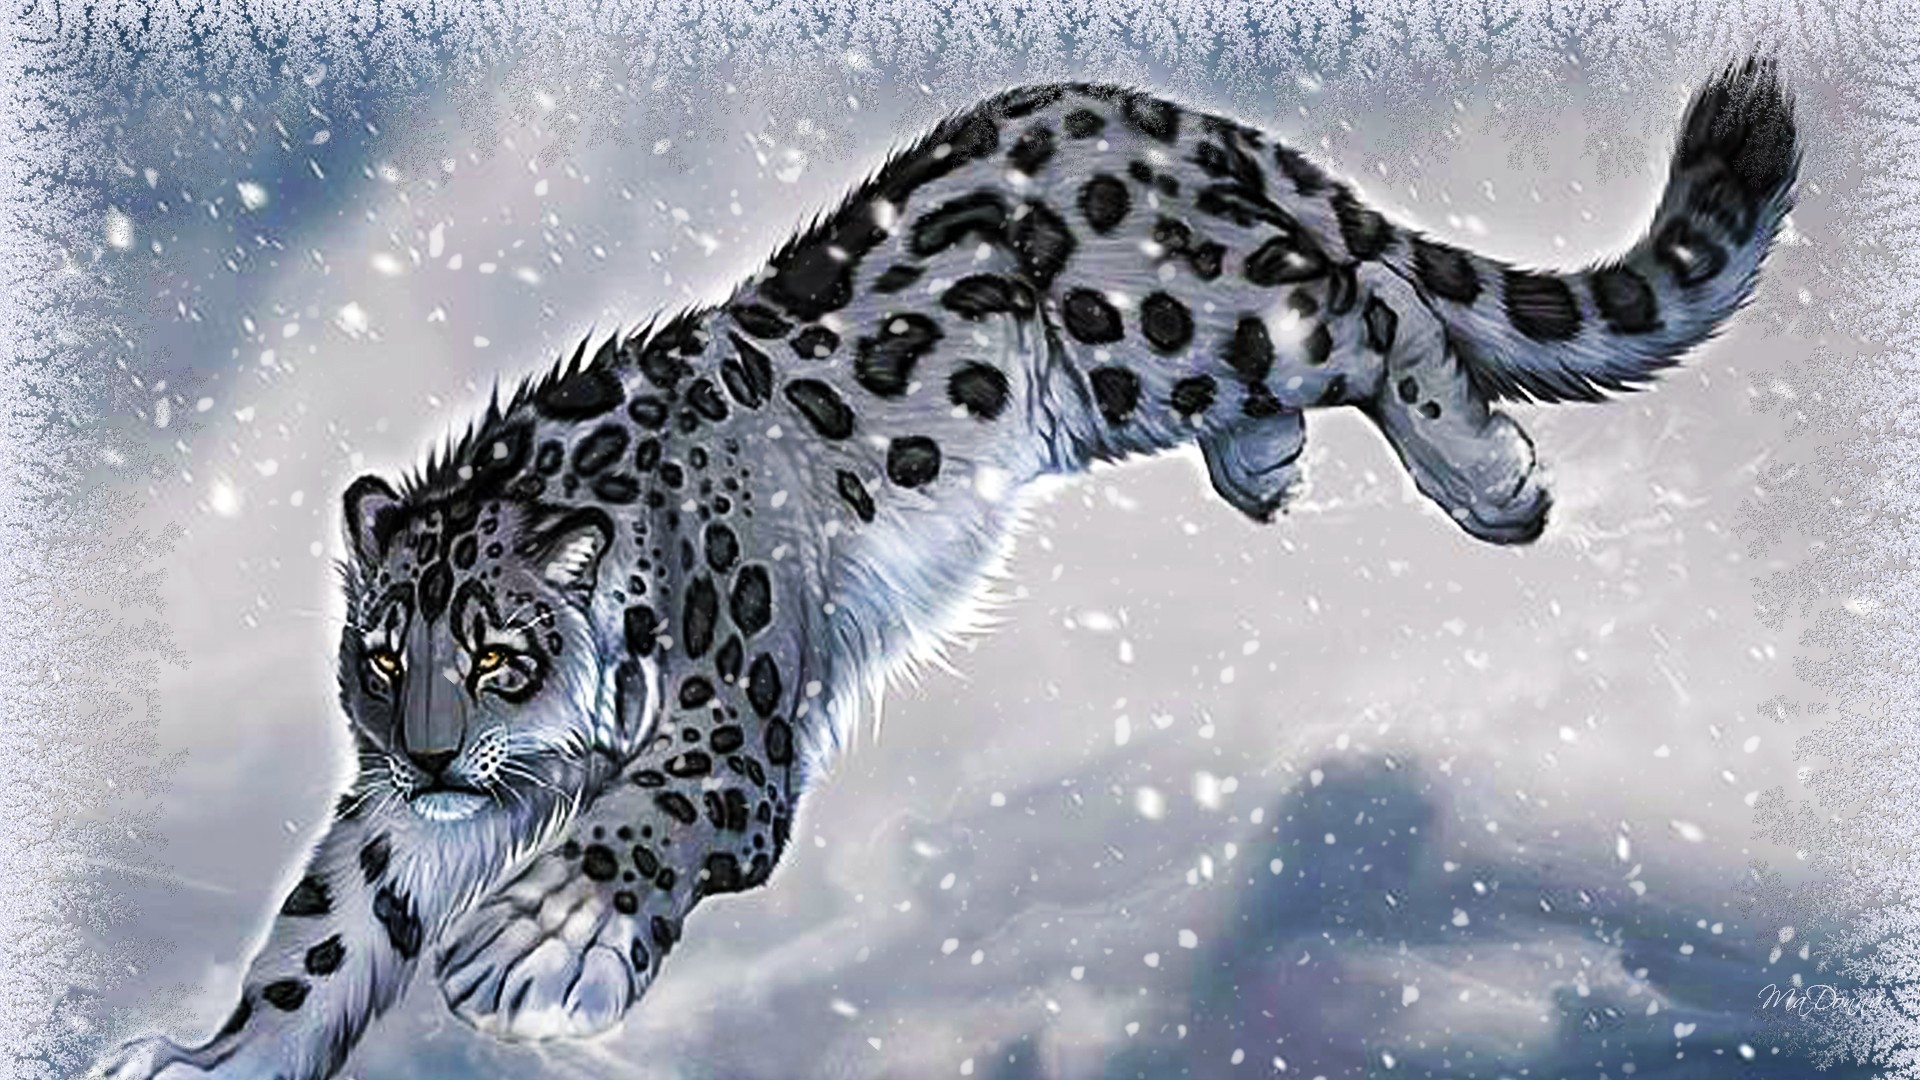 Im drawing xenoblade 1 characters as animals Day 1 of this challenge  Alvis as a snow leopard  rXenobladeChronicles